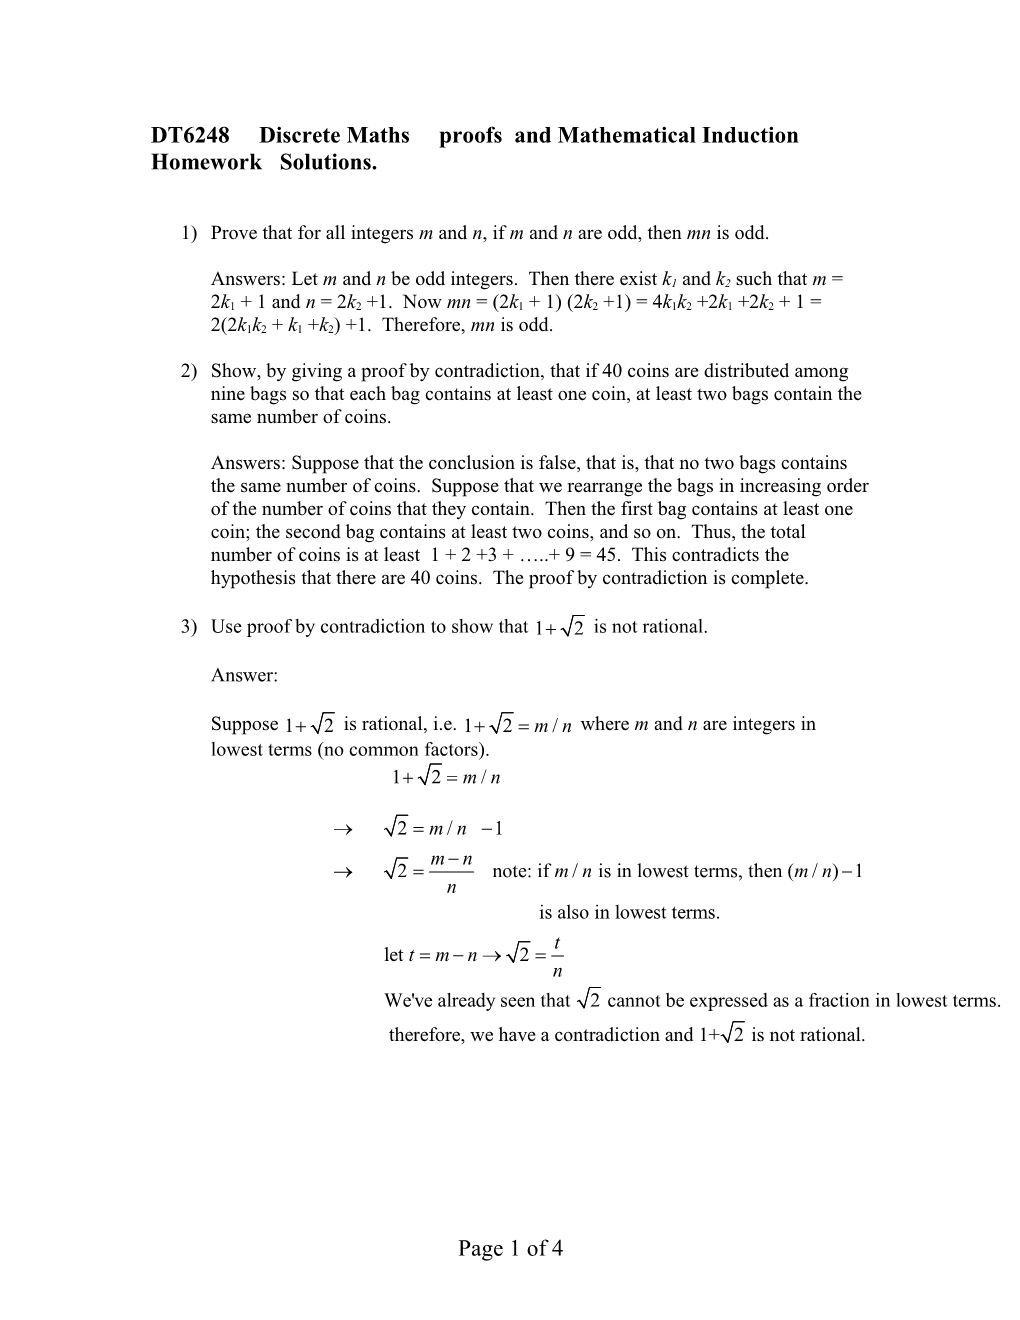 DT6248 Discrete Maths Proofs and Mathematical Induction Homework Solutions